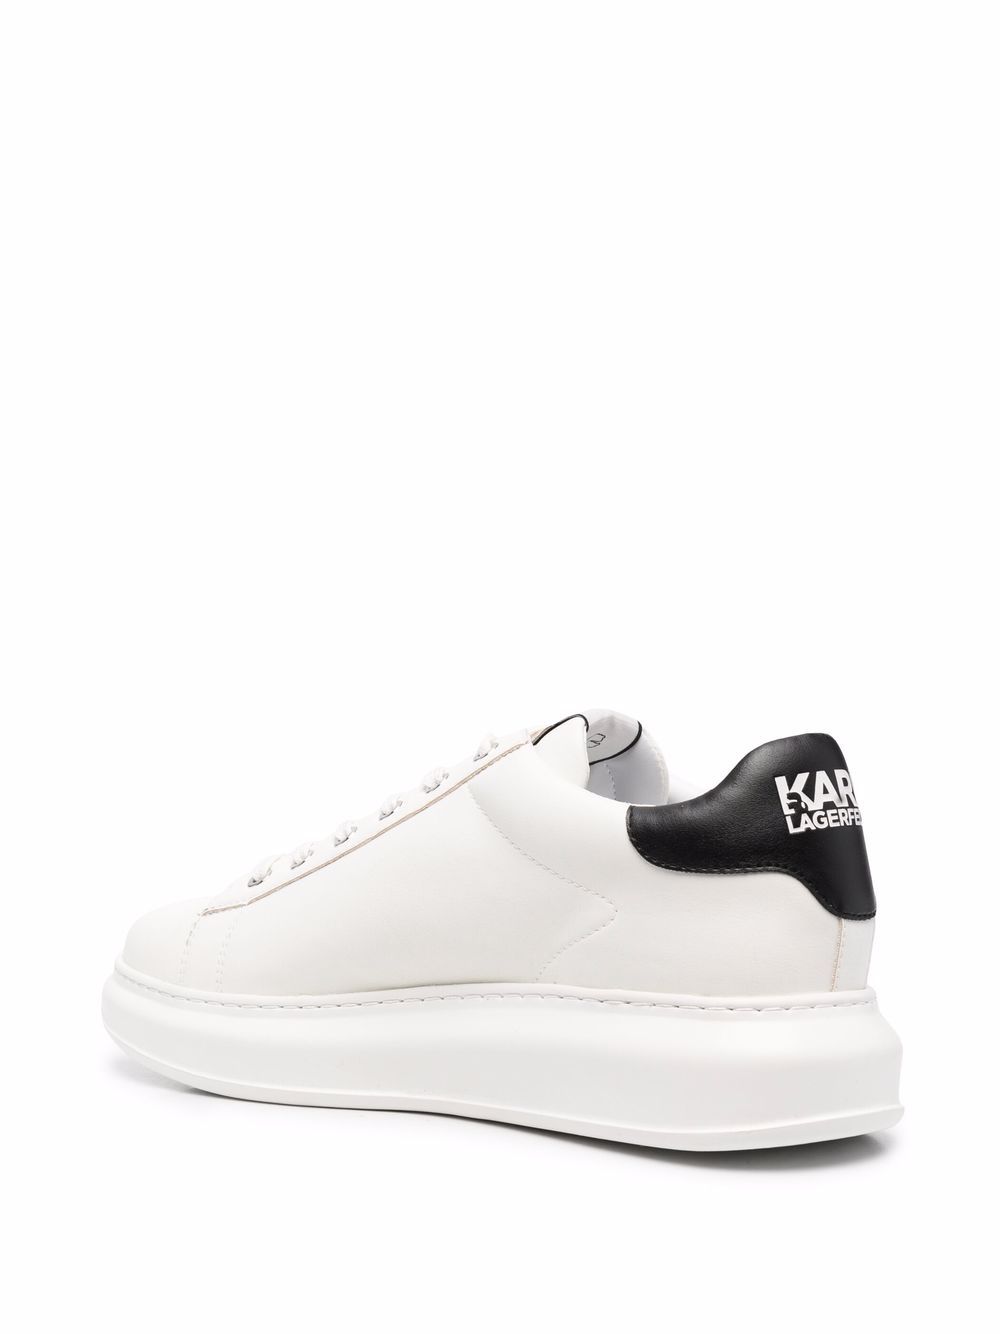 KARL LAGERFELD LOGO-PATCH LEATHER SNEAKERS